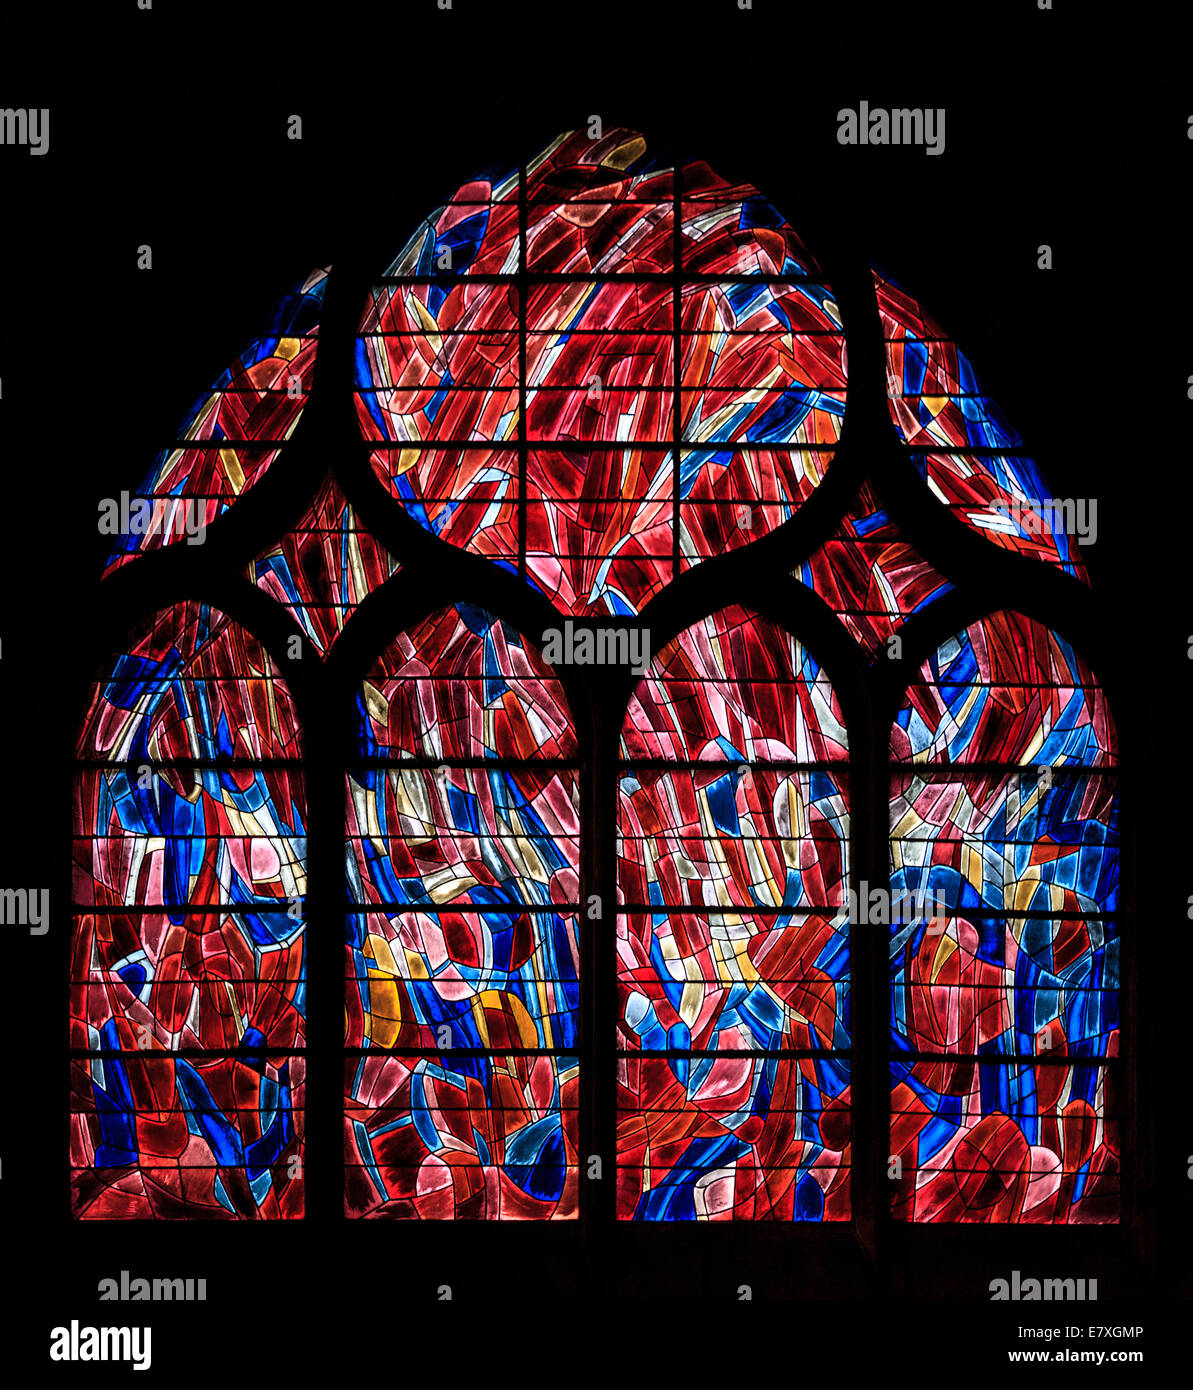 A stained glass window inside L 'Eglise Saint-Severin, Paris, France Stock Photo